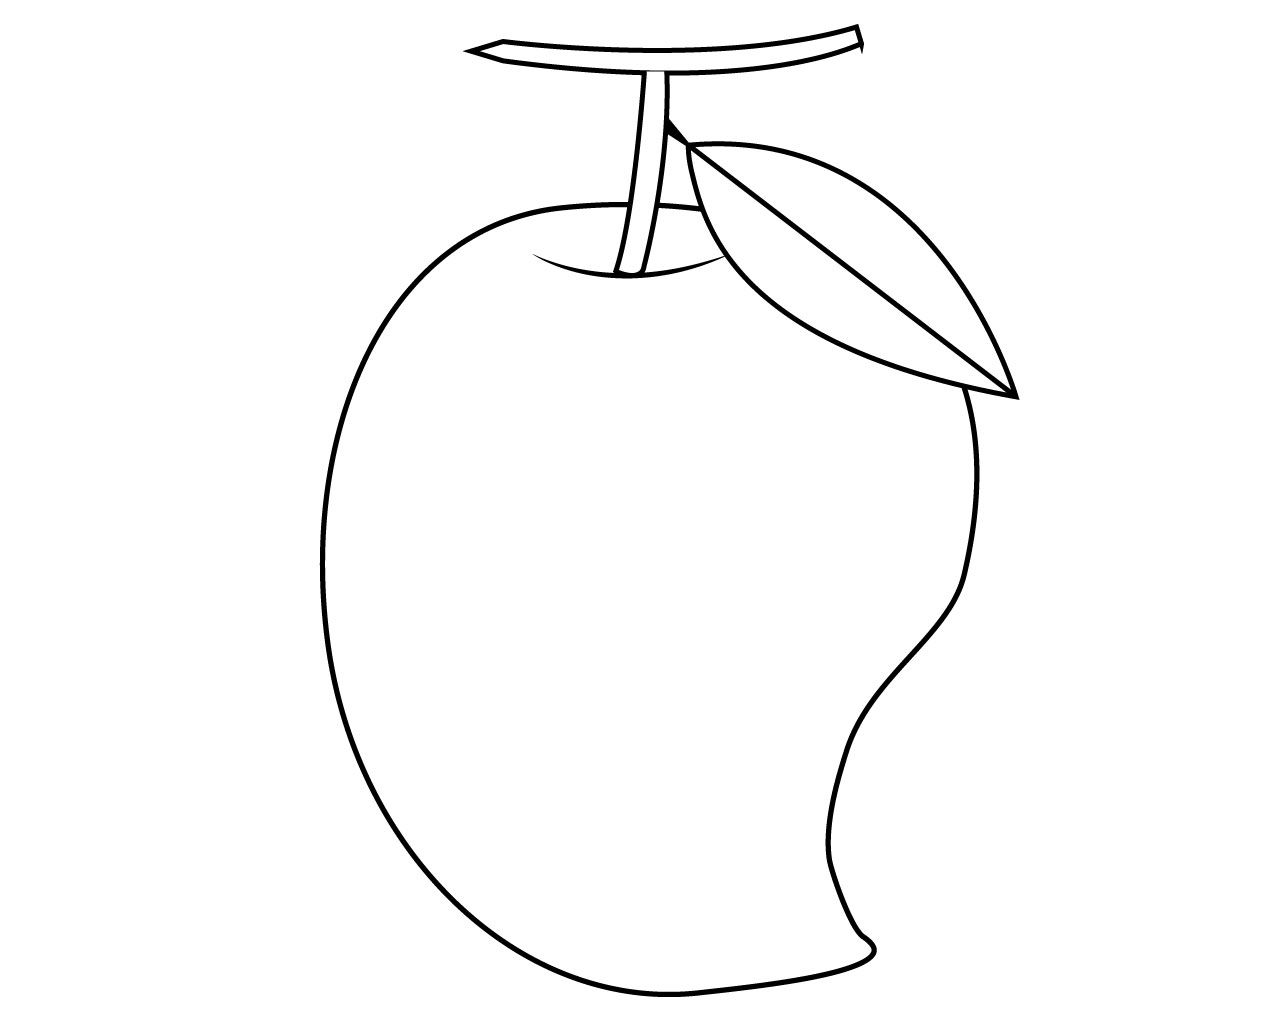 Mango clipart colouring page, Mango colouring page Transparent FREE for